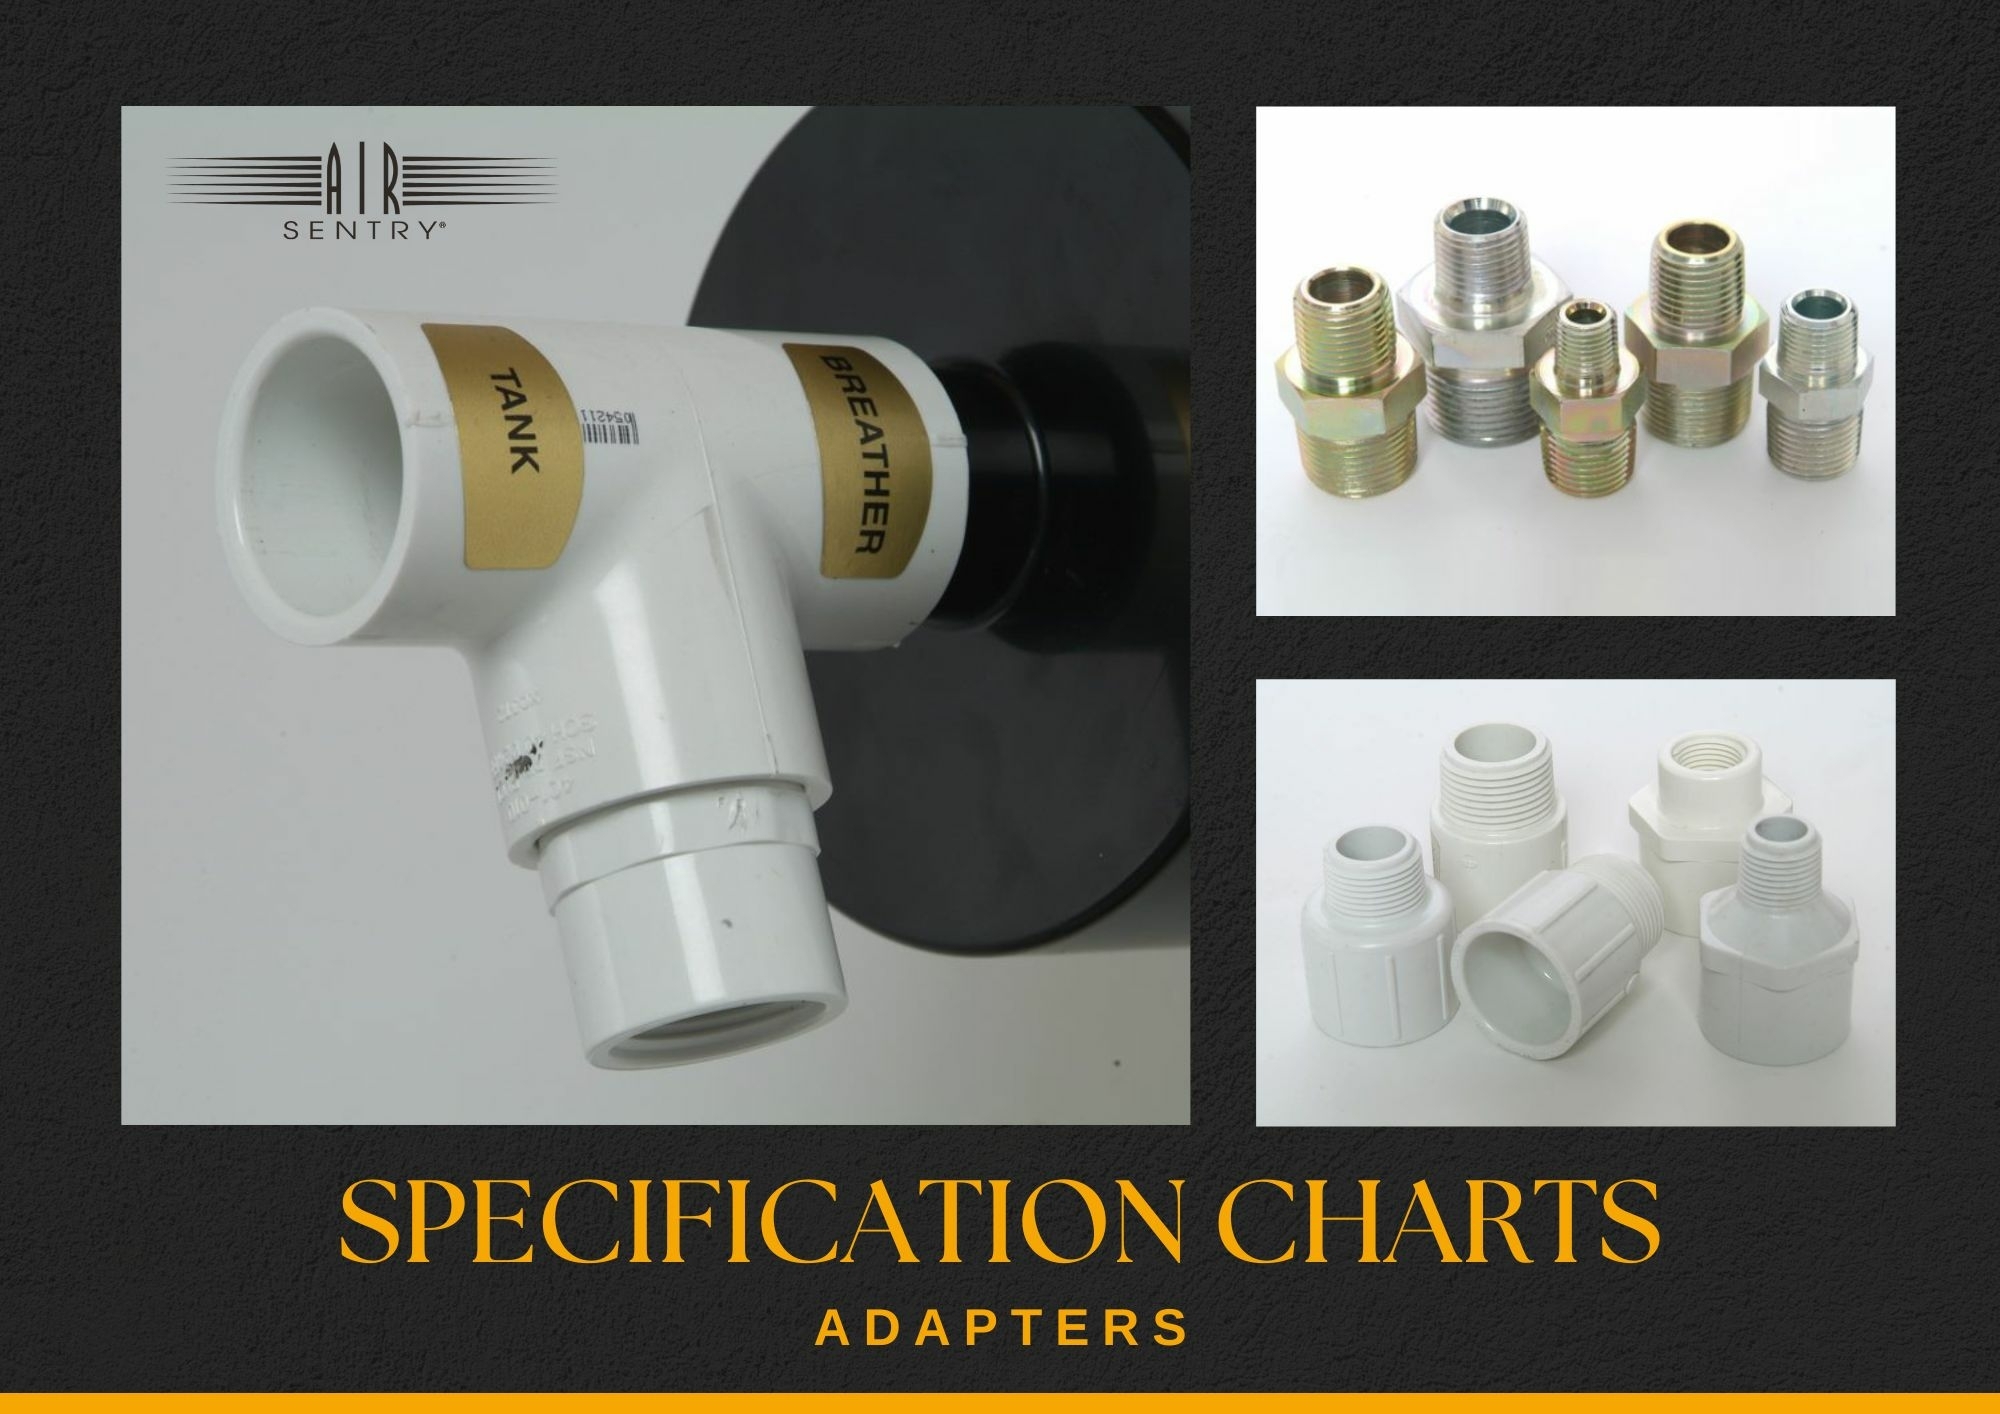 Adapter specification charts